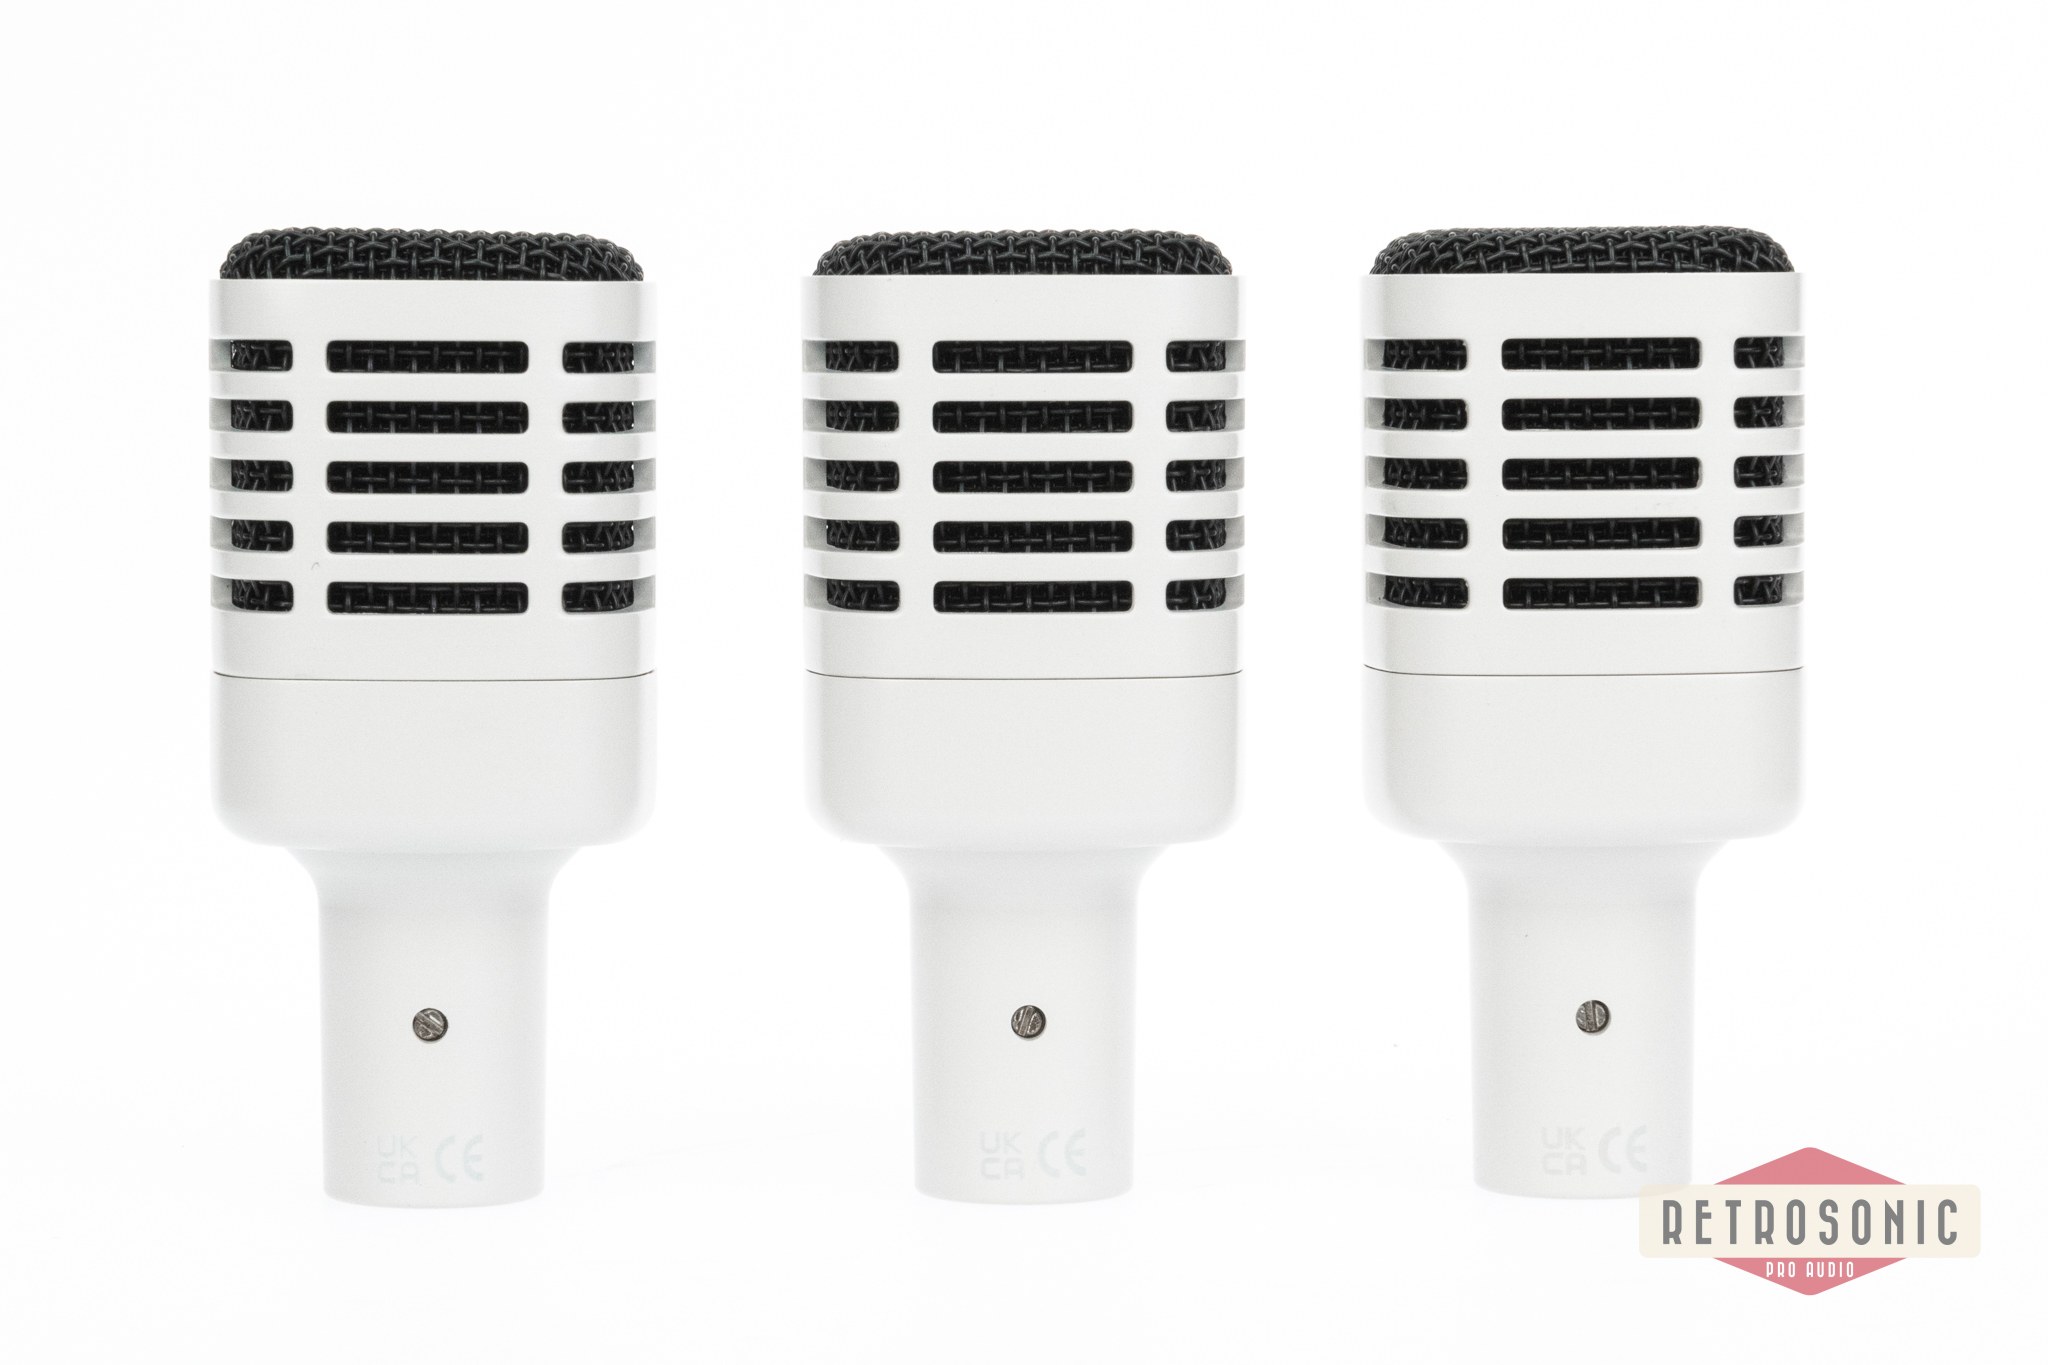 Universal Audio SD-3 Dynamic microphone 3-Pack with Hemisphere Modeling